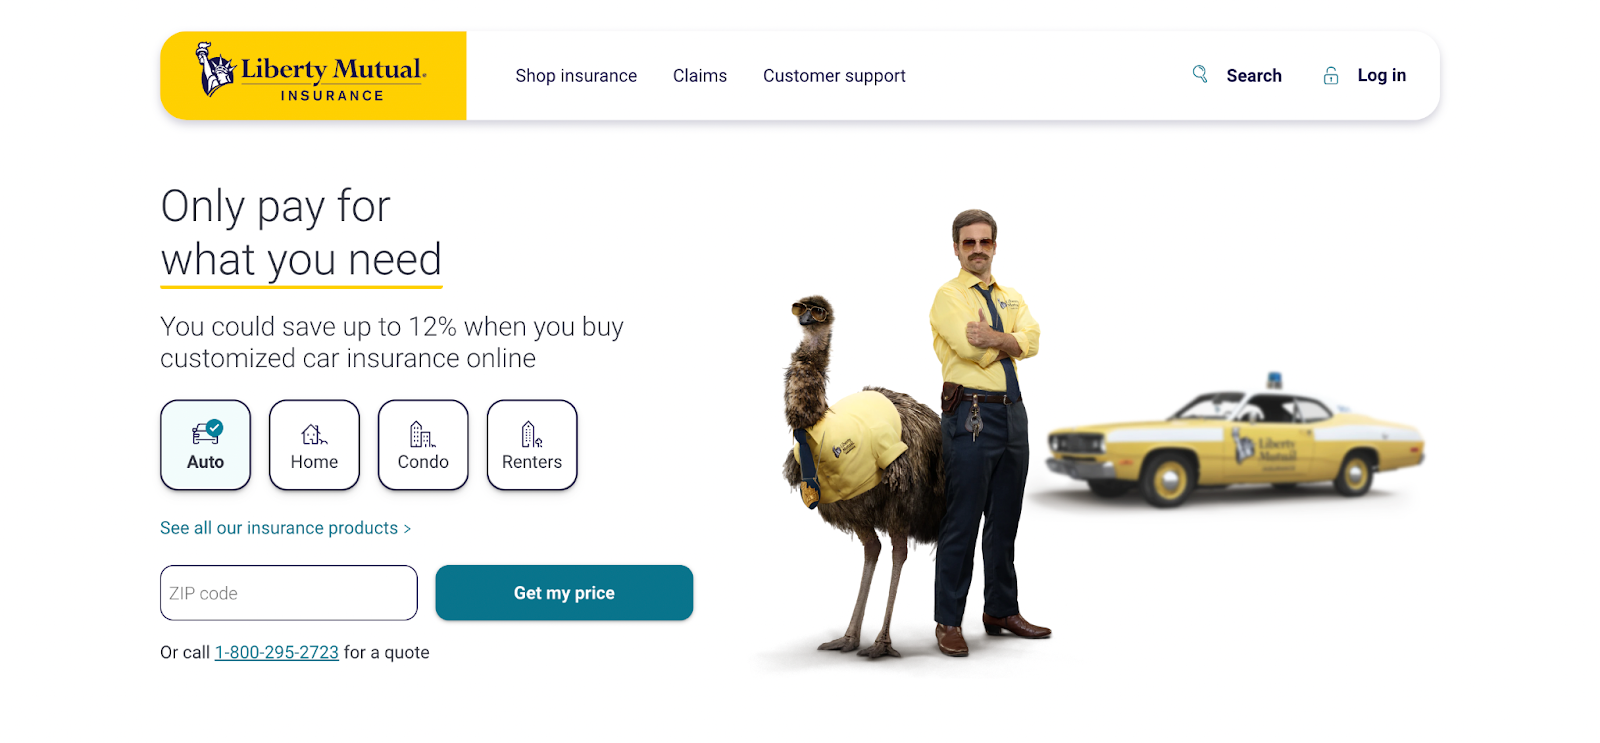 Insurance website design, example from Liberty Mutual